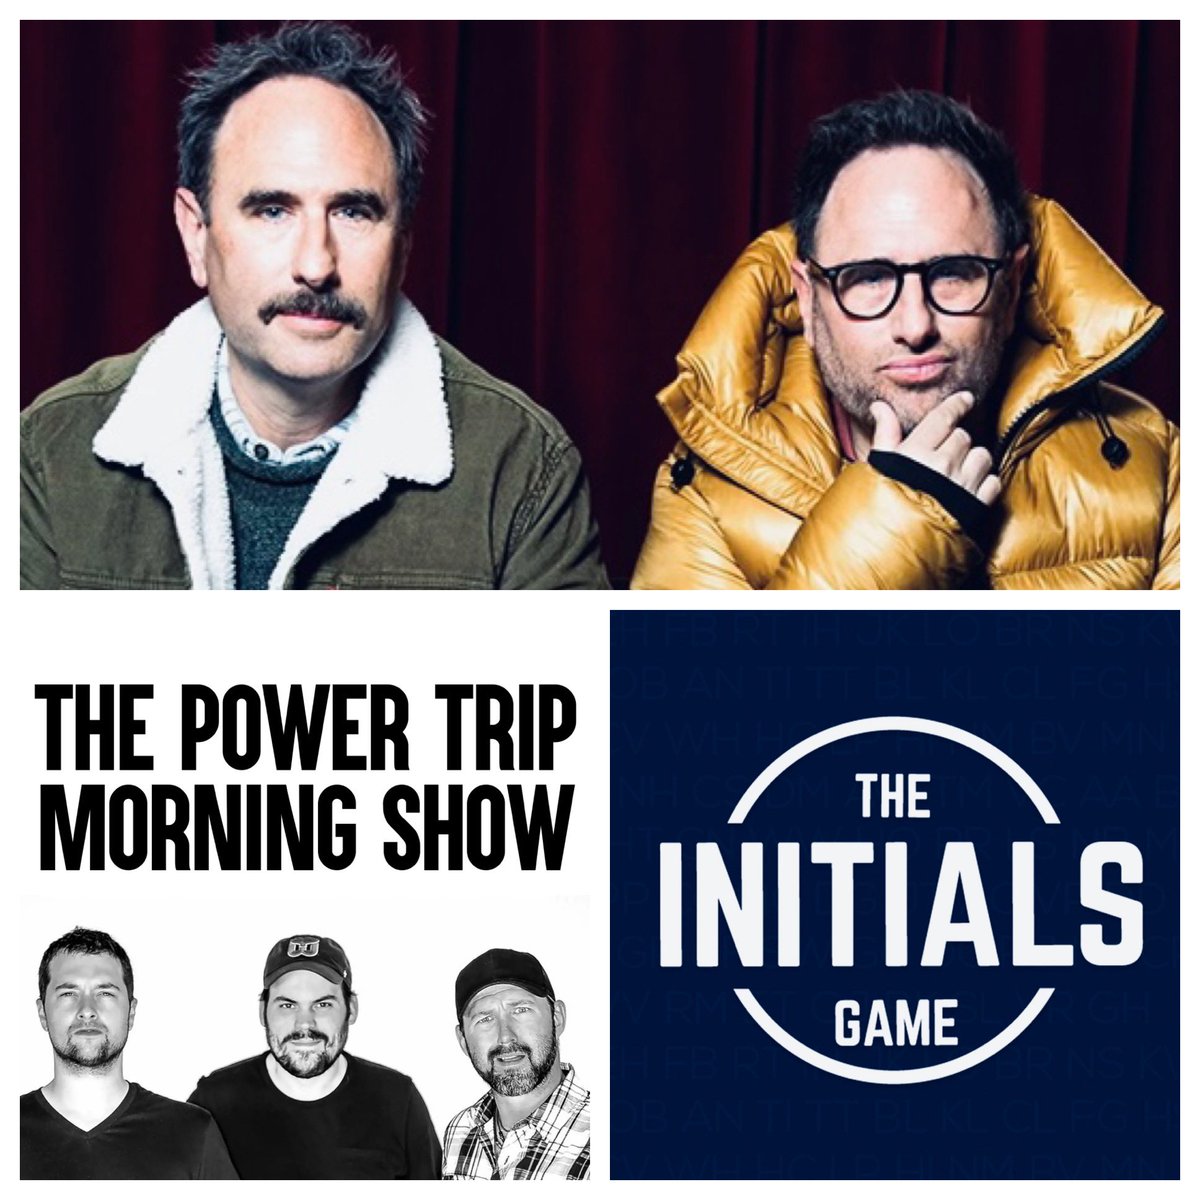 TOMORROW: The @SklarBrothers join the @PowerTripKFAN from 7:30-9:00 on @KFAN1003. Randy and Jason will also play @InitialsGame at 8:15. See the fellas at @AcmeComedyCo this weekend and check them out on the @PowerTripKFAN Friday morning. LISTEN HERE: KFAN.com/listen